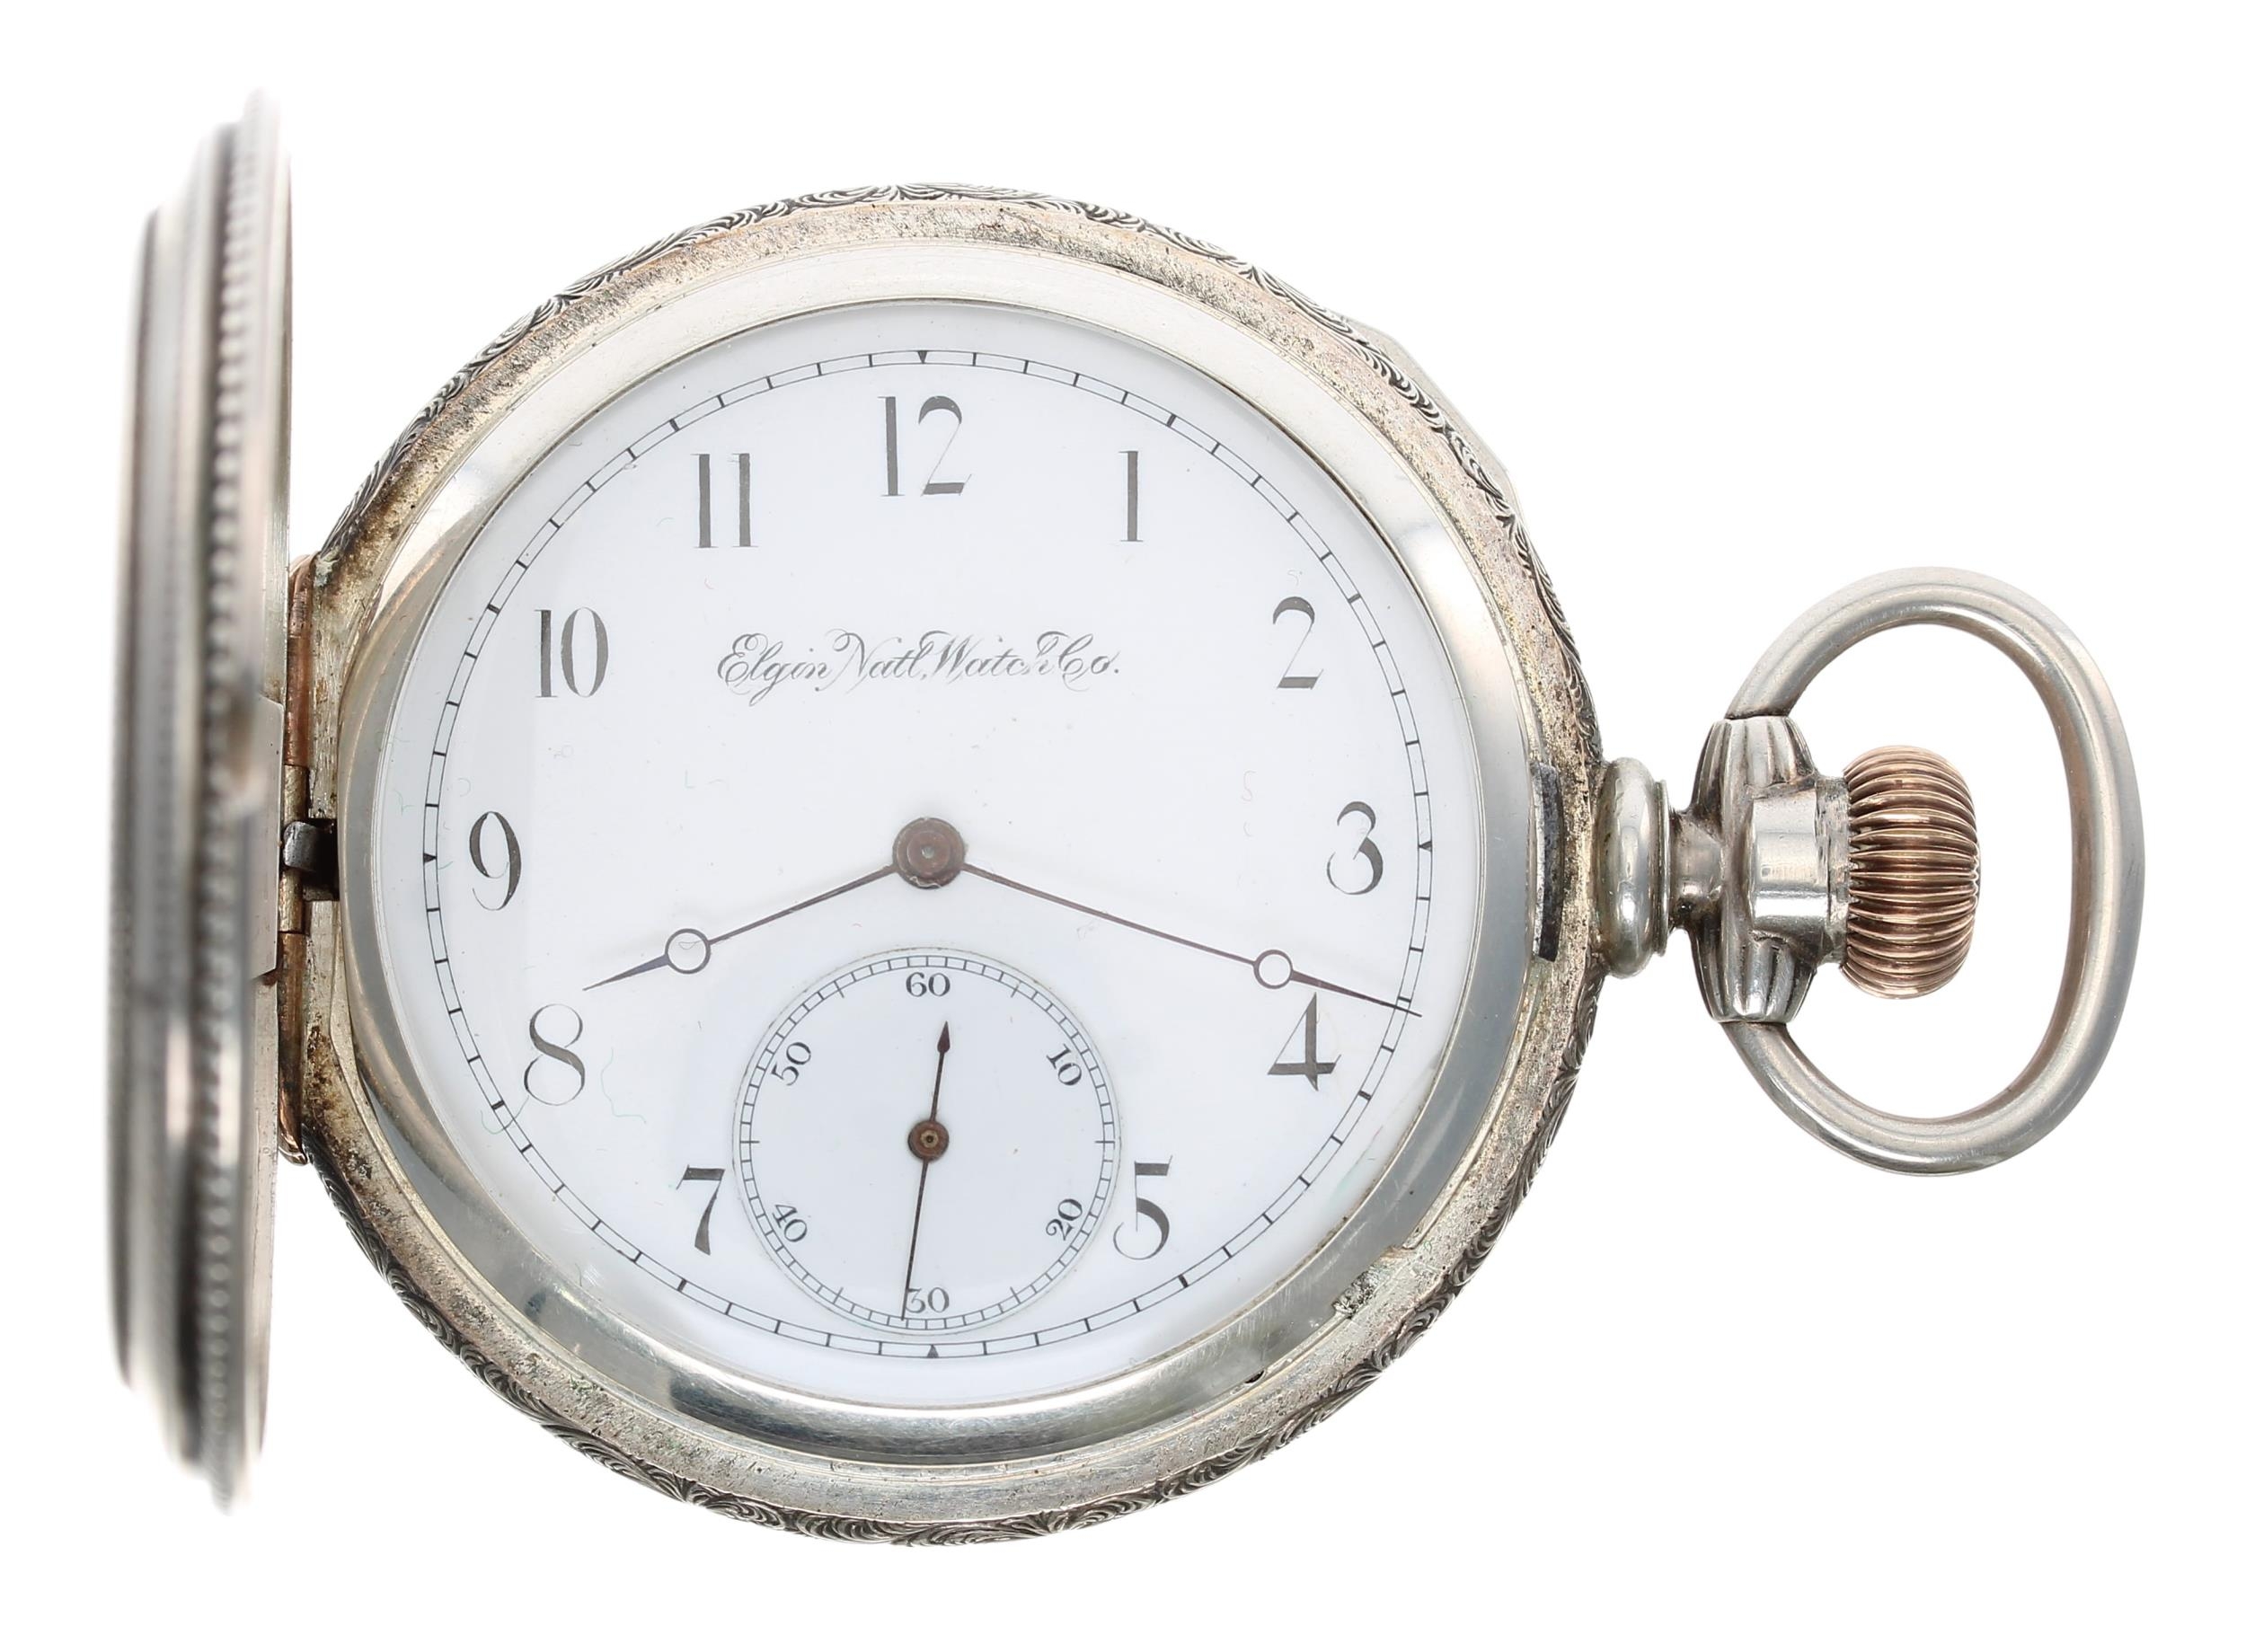 Elgin National Watch Co. lever set hunter pocket watch, circa 1886, signed movement, no. 2346806, - Image 2 of 5